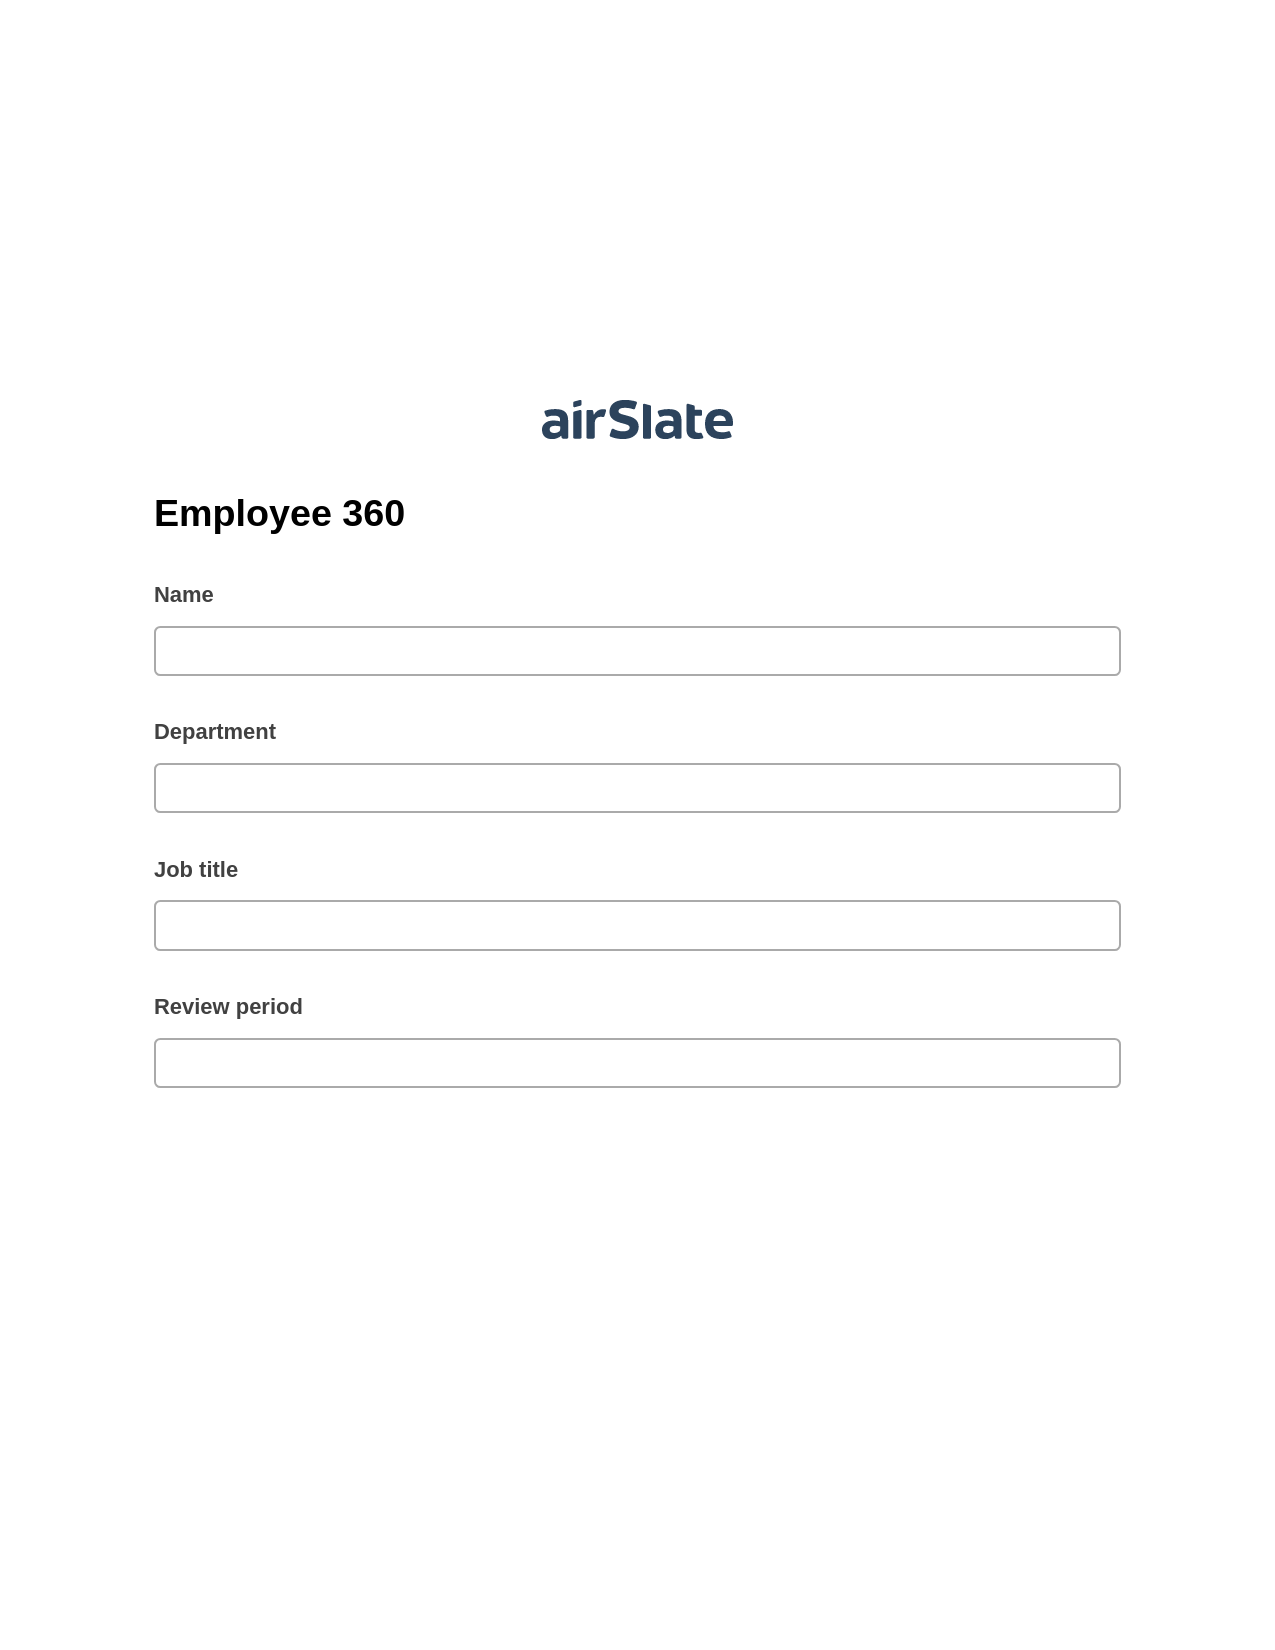 Employee 360 Pre-fill from another Slate Bot, Invoke Salesforce Process Bot, Export to Smartsheet